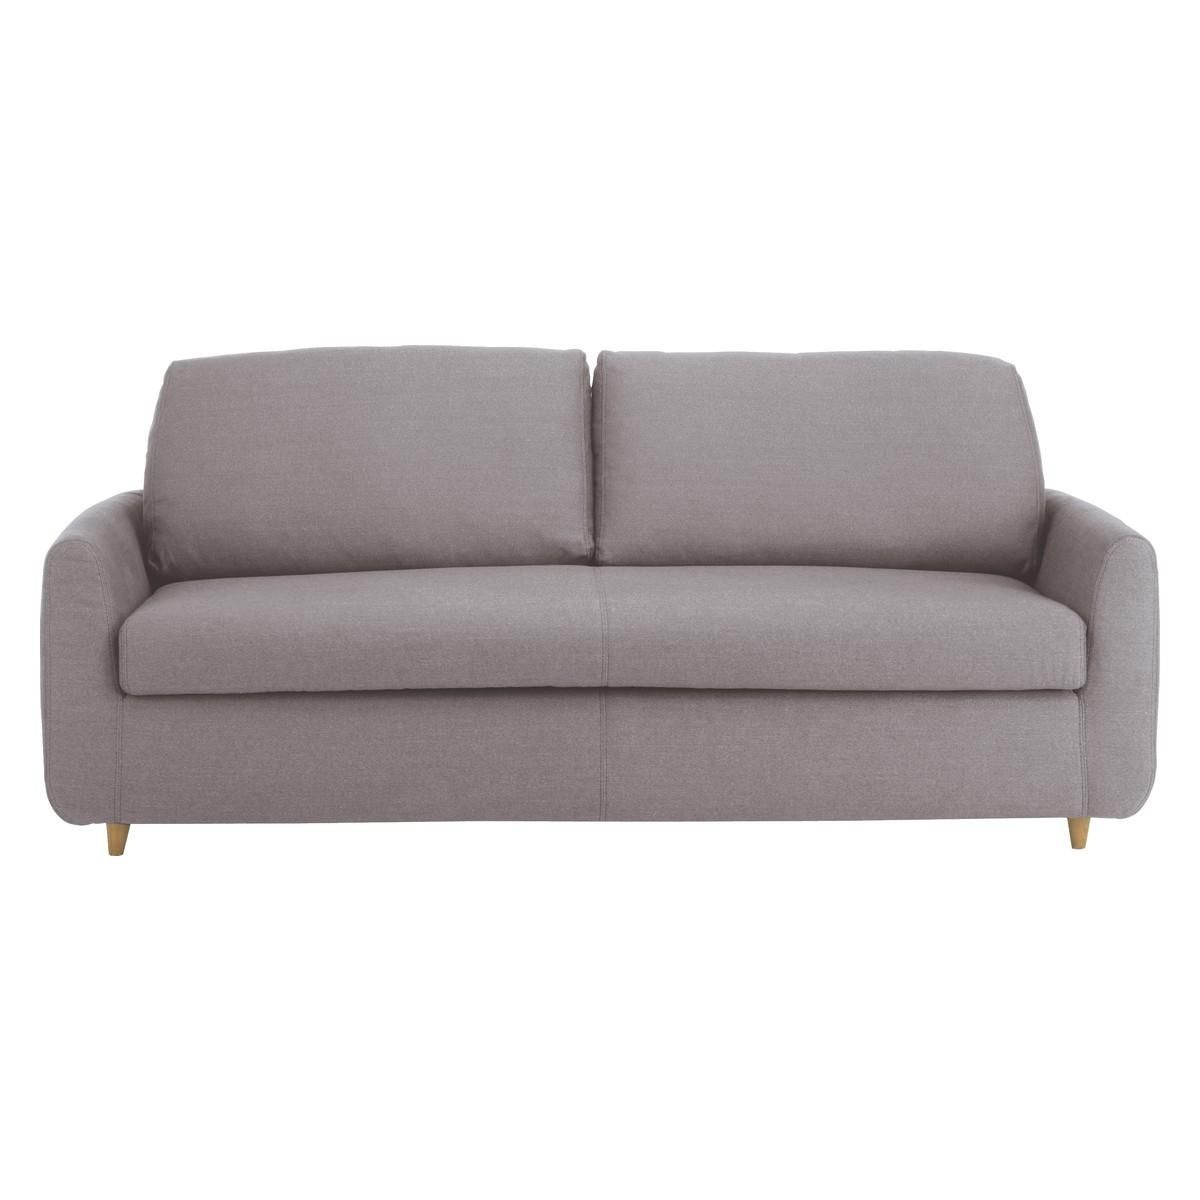 Trend 3 Seater Sofa Bed Sale 15 In Sectional Sofa Bed Canada With In 3 Seater Sofas For Sale (Photo 12 of 21)